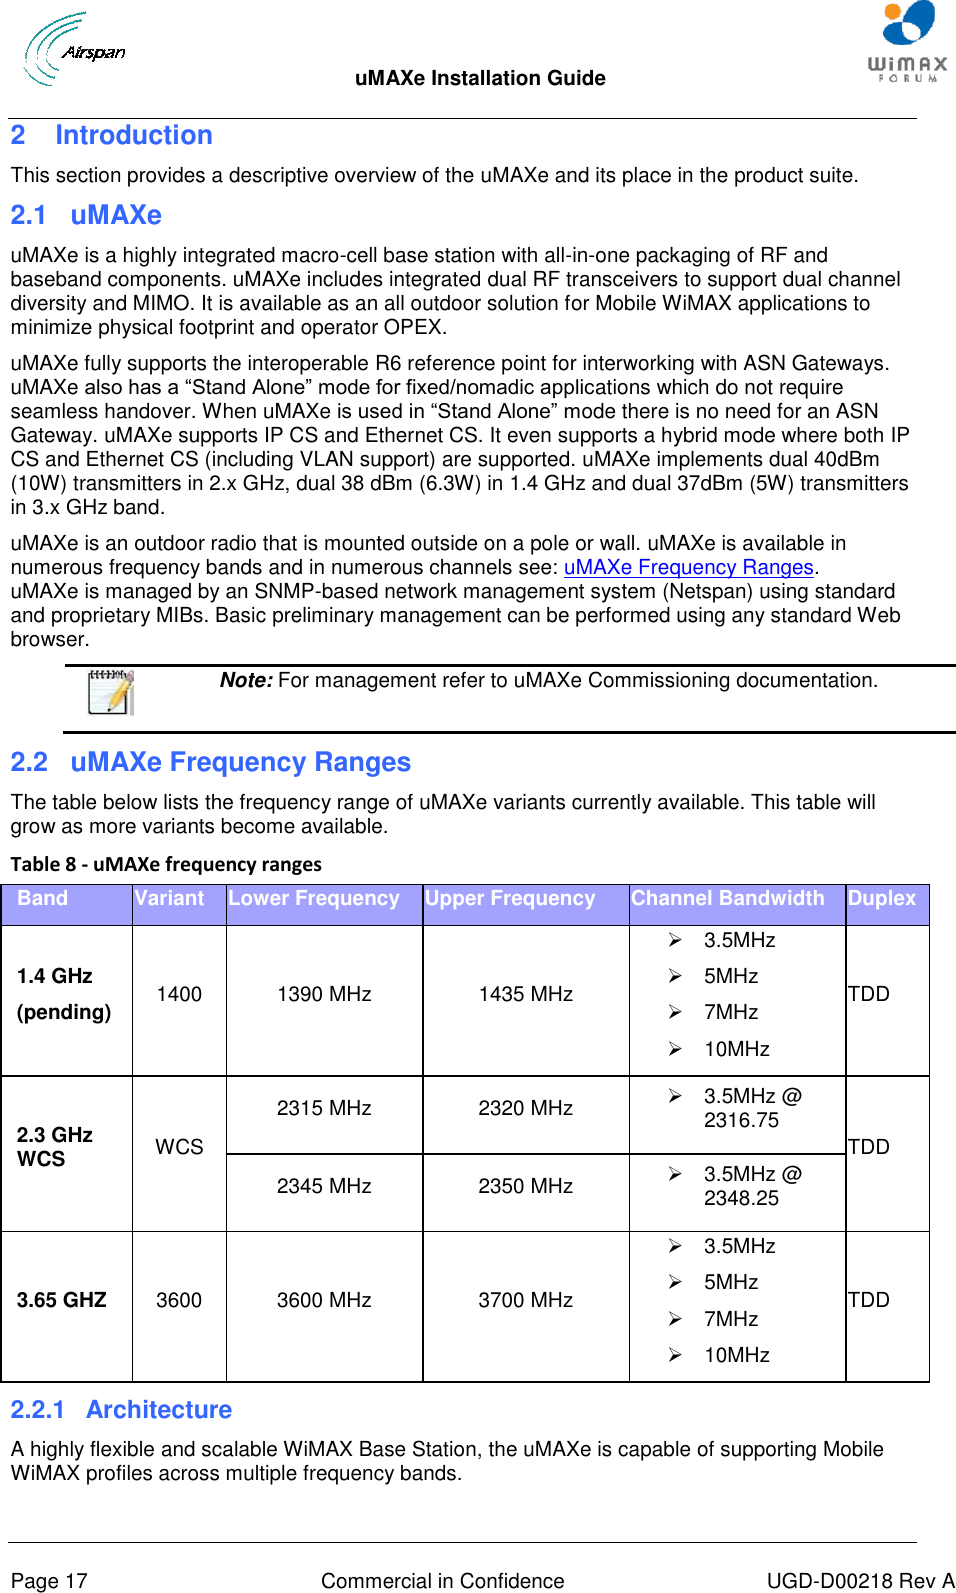  uMAXe Installation Guide       Page 17  Commercial in Confidence  UGD-D00218 Rev A 2  Introduction This section provides a descriptive overview of the uMAXe and its place in the product suite. 2.1  uMAXe uMAXe is a highly integrated macro-cell base station with all-in-one packaging of RF and baseband components. uMAXe includes integrated dual RF transceivers to support dual channel diversity and MIMO. It is available as an all outdoor solution for Mobile WiMAX applications to minimize physical footprint and operator OPEX. uMAXe fully supports the interoperable R6 reference point for interworking with ASN Gateways. uMAXe also has a “Stand Alone” mode for fixed/nomadic applications which do not require seamless handover. When uMAXe is used in “Stand Alone” mode there is no need for an ASN Gateway. uMAXe supports IP CS and Ethernet CS. It even supports a hybrid mode where both IP CS and Ethernet CS (including VLAN support) are supported. uMAXe implements dual 40dBm (10W) transmitters in 2.x GHz, dual 38 dBm (6.3W) in 1.4 GHz and dual 37dBm (5W) transmitters in 3.x GHz band. uMAXe is an outdoor radio that is mounted outside on a pole or wall. uMAXe is available in numerous frequency bands and in numerous channels see: uMAXe Frequency Ranges.uMAXe is managed by an SNMP-based network management system (Netspan) using standard and proprietary MIBs. Basic preliminary management can be performed using any standard Web browser.  Note: For management refer to uMAXe Commissioning documentation. 2.2  uMAXe Frequency Ranges The table below lists the frequency range of uMAXe variants currently available. This table will grow as more variants become available. Table 8 - uMAXe frequency ranges Band Variant Lower Frequency Upper Frequency Channel Bandwidth Duplex 1.4 GHz (pending) 1400 1390 MHz 1435 MHz   3.5MHz   5MHz   7MHz   10MHz TDD 2.3 GHz WCS WCS 2315 MHz 2320 MHz   3.5MHz @ 2316.75 TDD 2345 MHz 2350 MHz   3.5MHz @ 2348.25 3.65 GHZ 3600 3600 MHz 3700 MHz   3.5MHz   5MHz   7MHz   10MHz TDD 2.2.1  Architecture A highly flexible and scalable WiMAX Base Station, the uMAXe is capable of supporting Mobile WiMAX profiles across multiple frequency bands. 